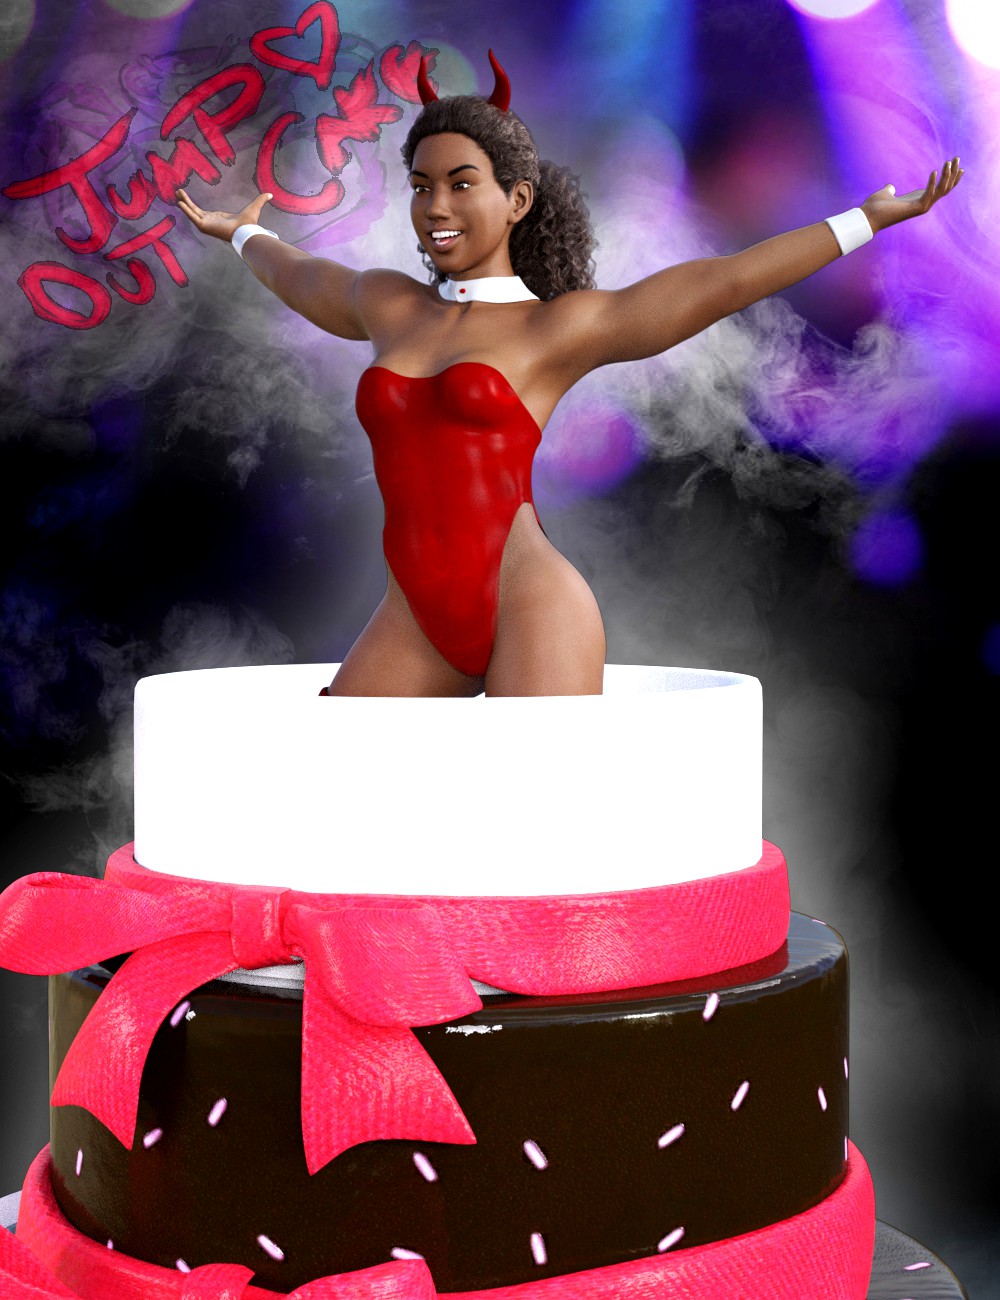 JumpOut Cake and Animations for Genesis 3 Male and Female